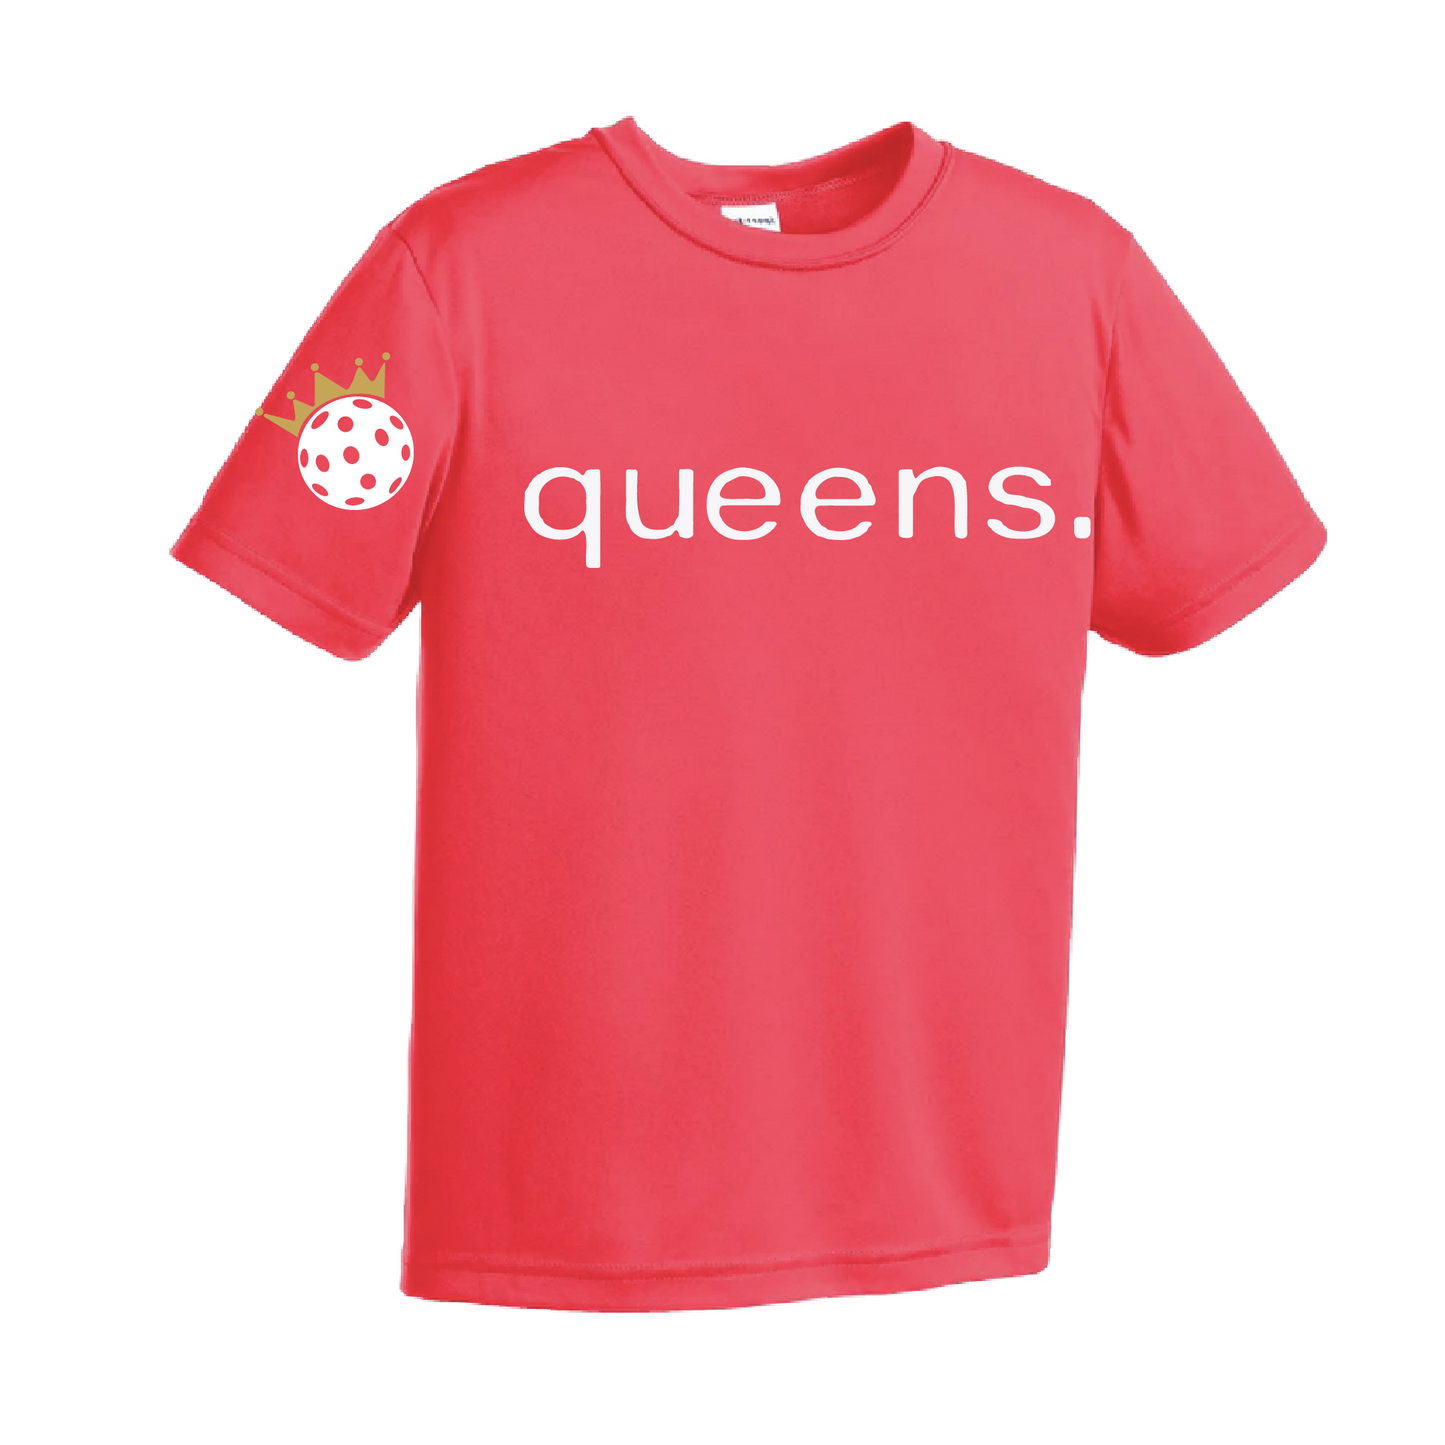 Youth-size Short Sleeve shirts feature Pickleball Queen and Crown Design motifs. Lightweight and breathable, these moisture-wicking shirts are designed for athletic performance and utilize PosiCharge technology to keep colors vibrant and logos from fading. Wearers will appreciate the comfort of the removable tags and set-in sleeves. A reliable, stylish choice for pickleball enthusiasts of all ages.